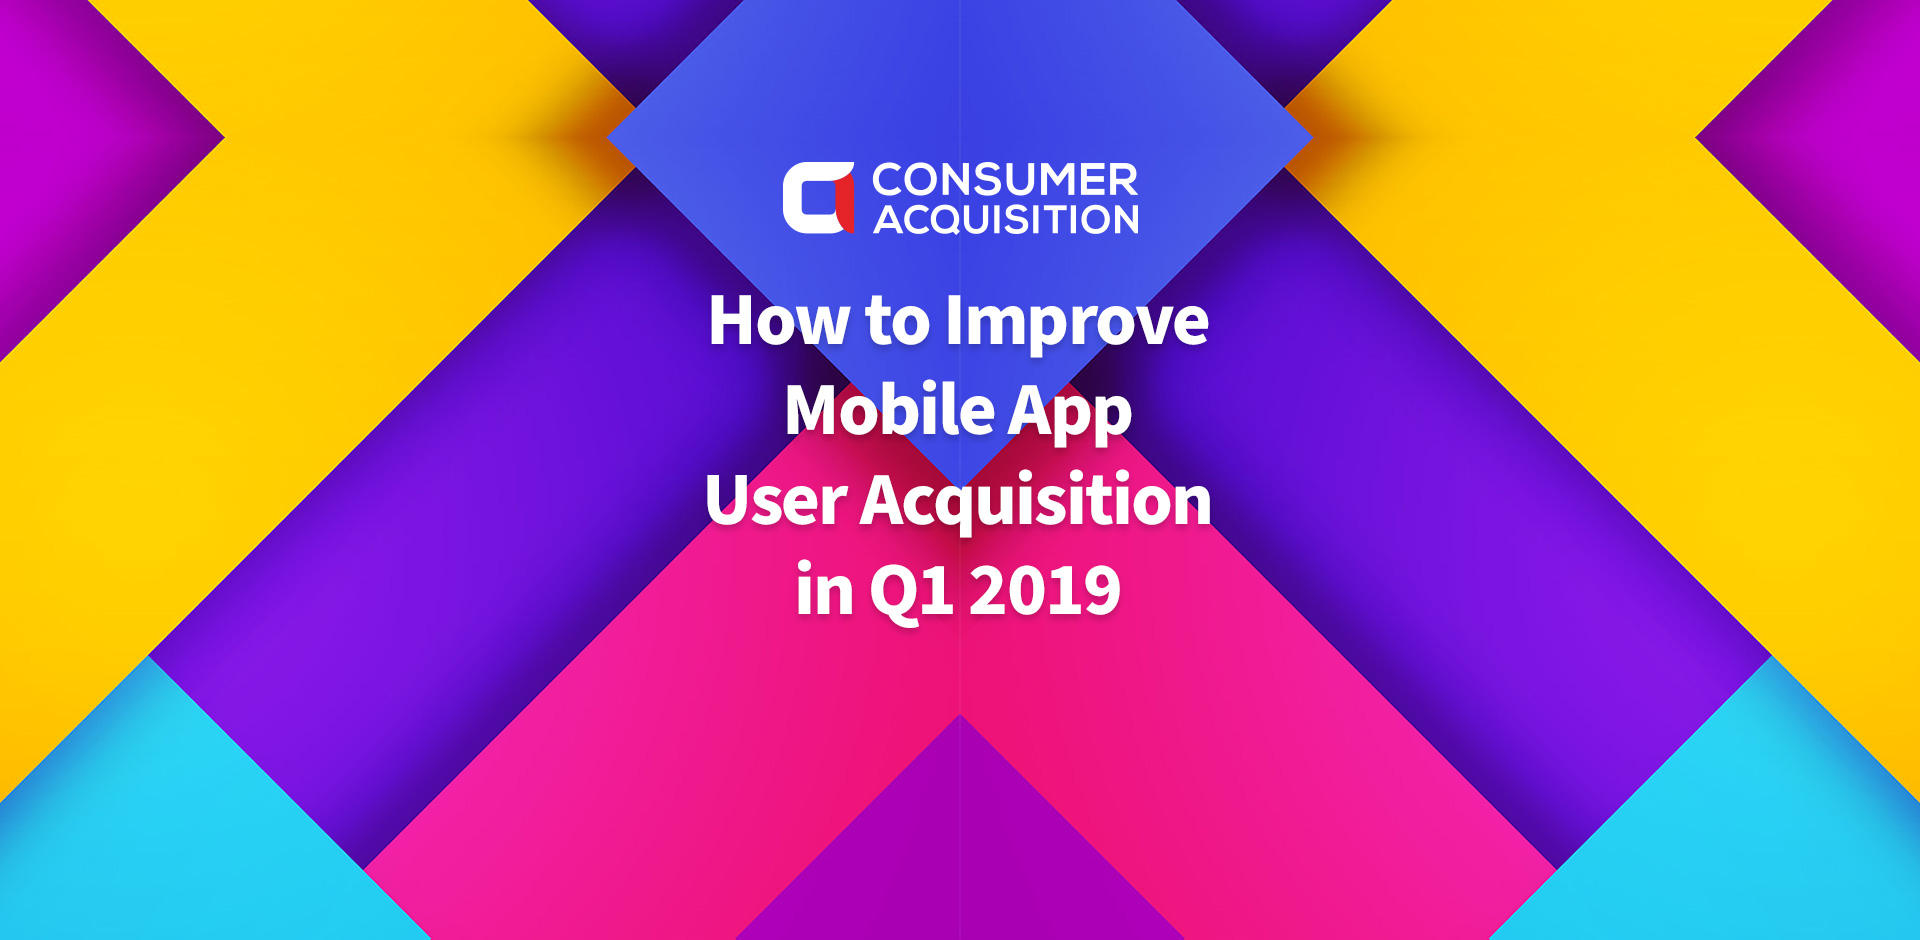 How to Improve Mobile App User Acquisition in Q1 2019